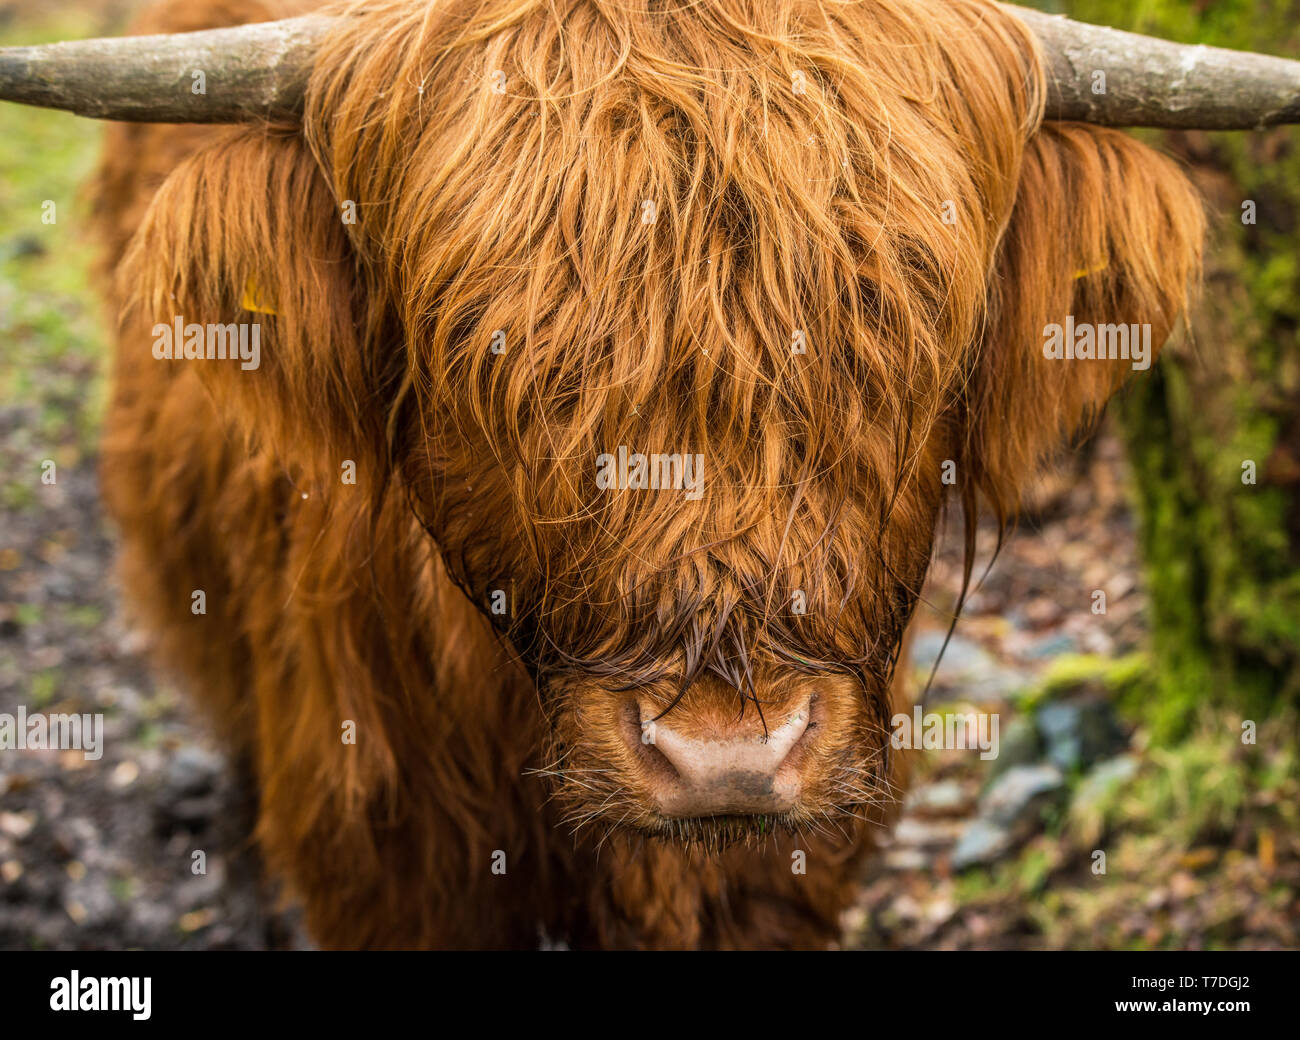 Highland Cow head on and close up. Stock Photo